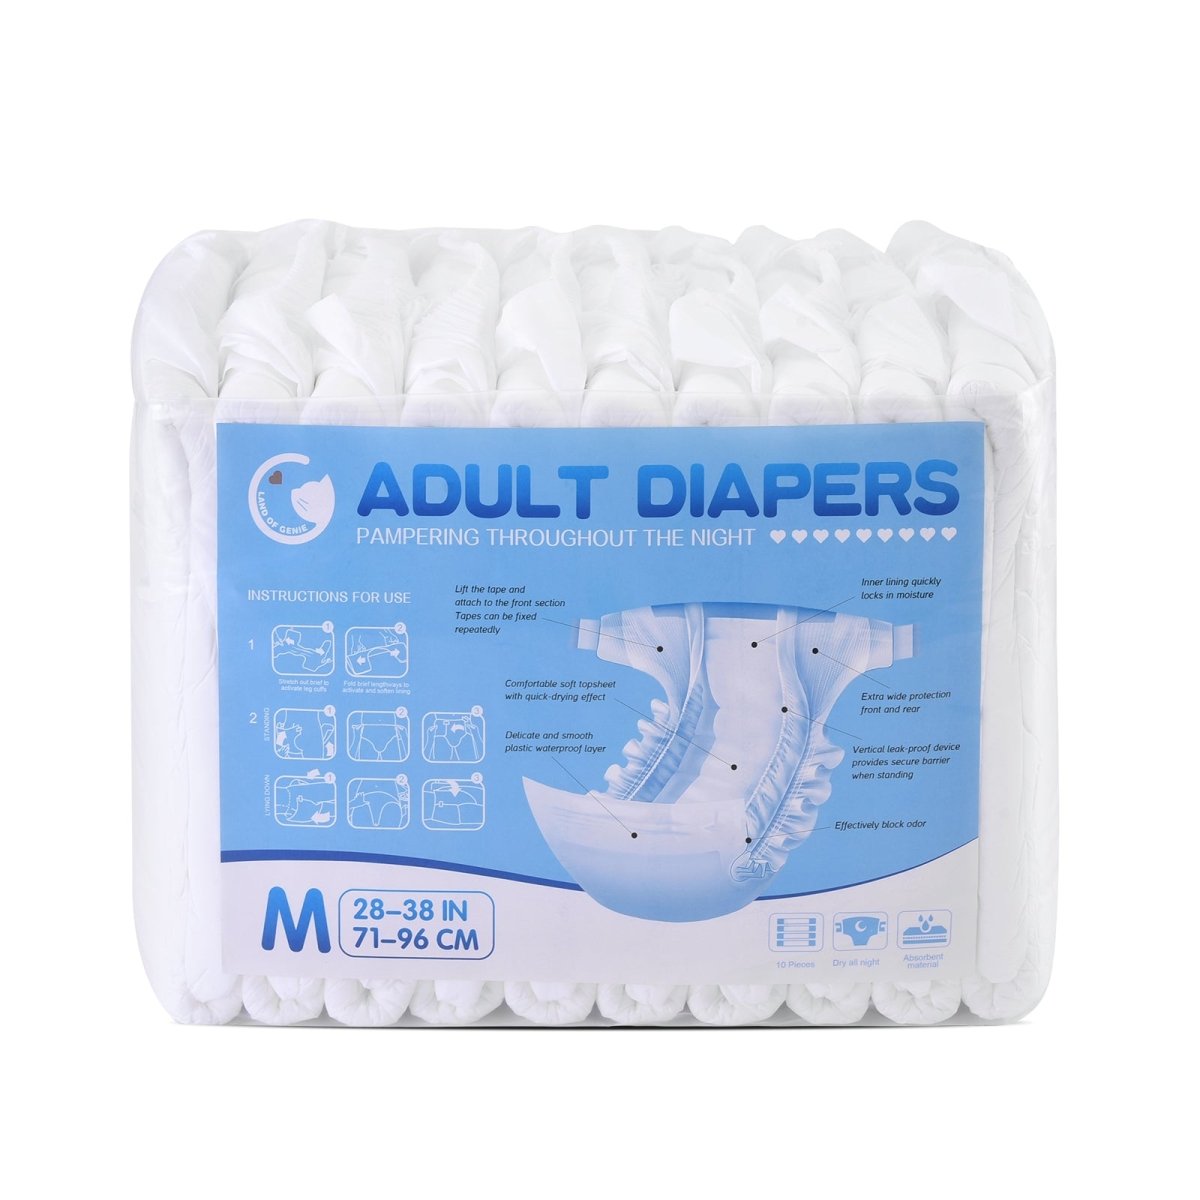 Factory Price and High Quality Adult Diapers and Adult Nappies